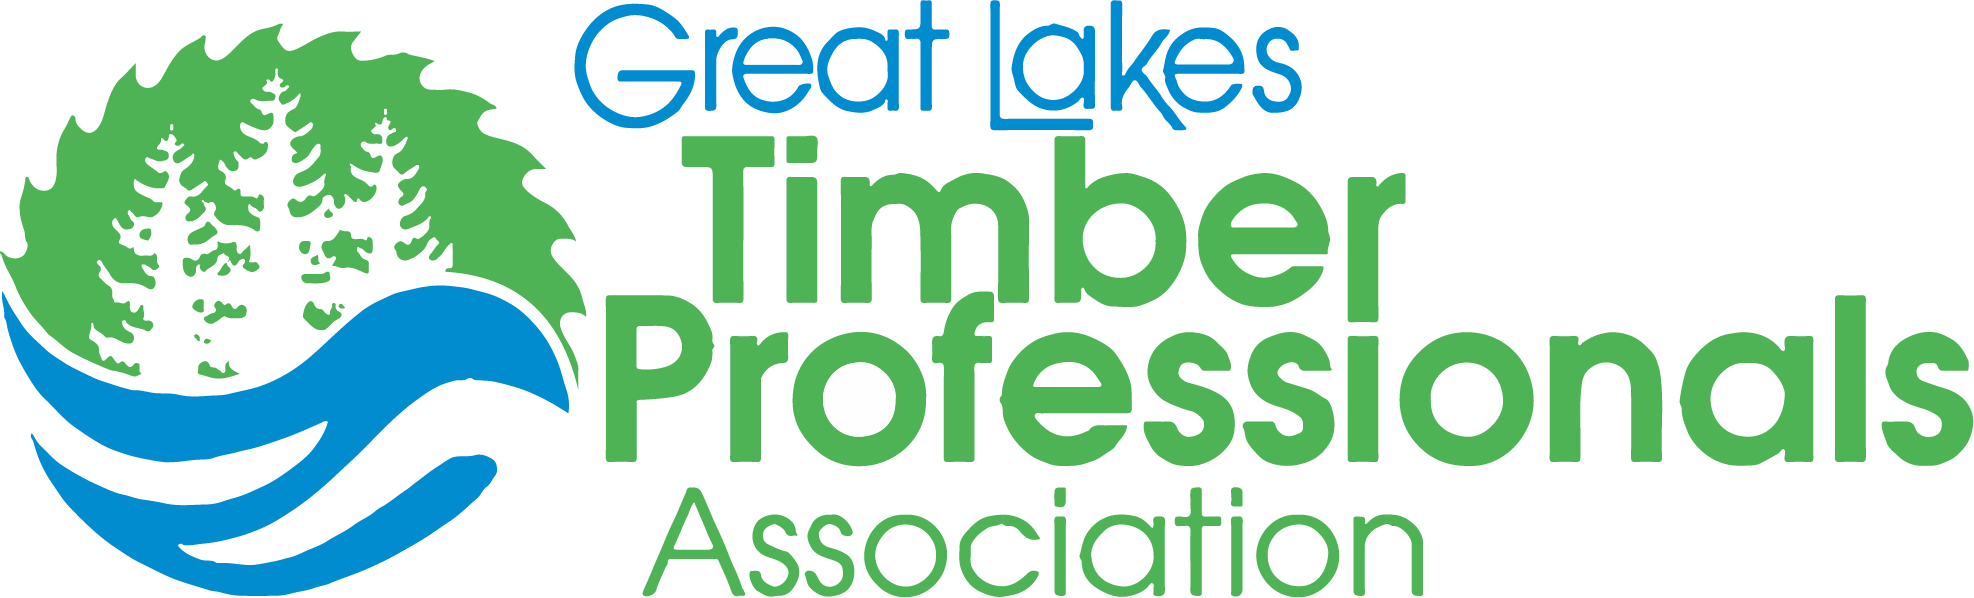 Great Lakes Timber Professionals Association Logo